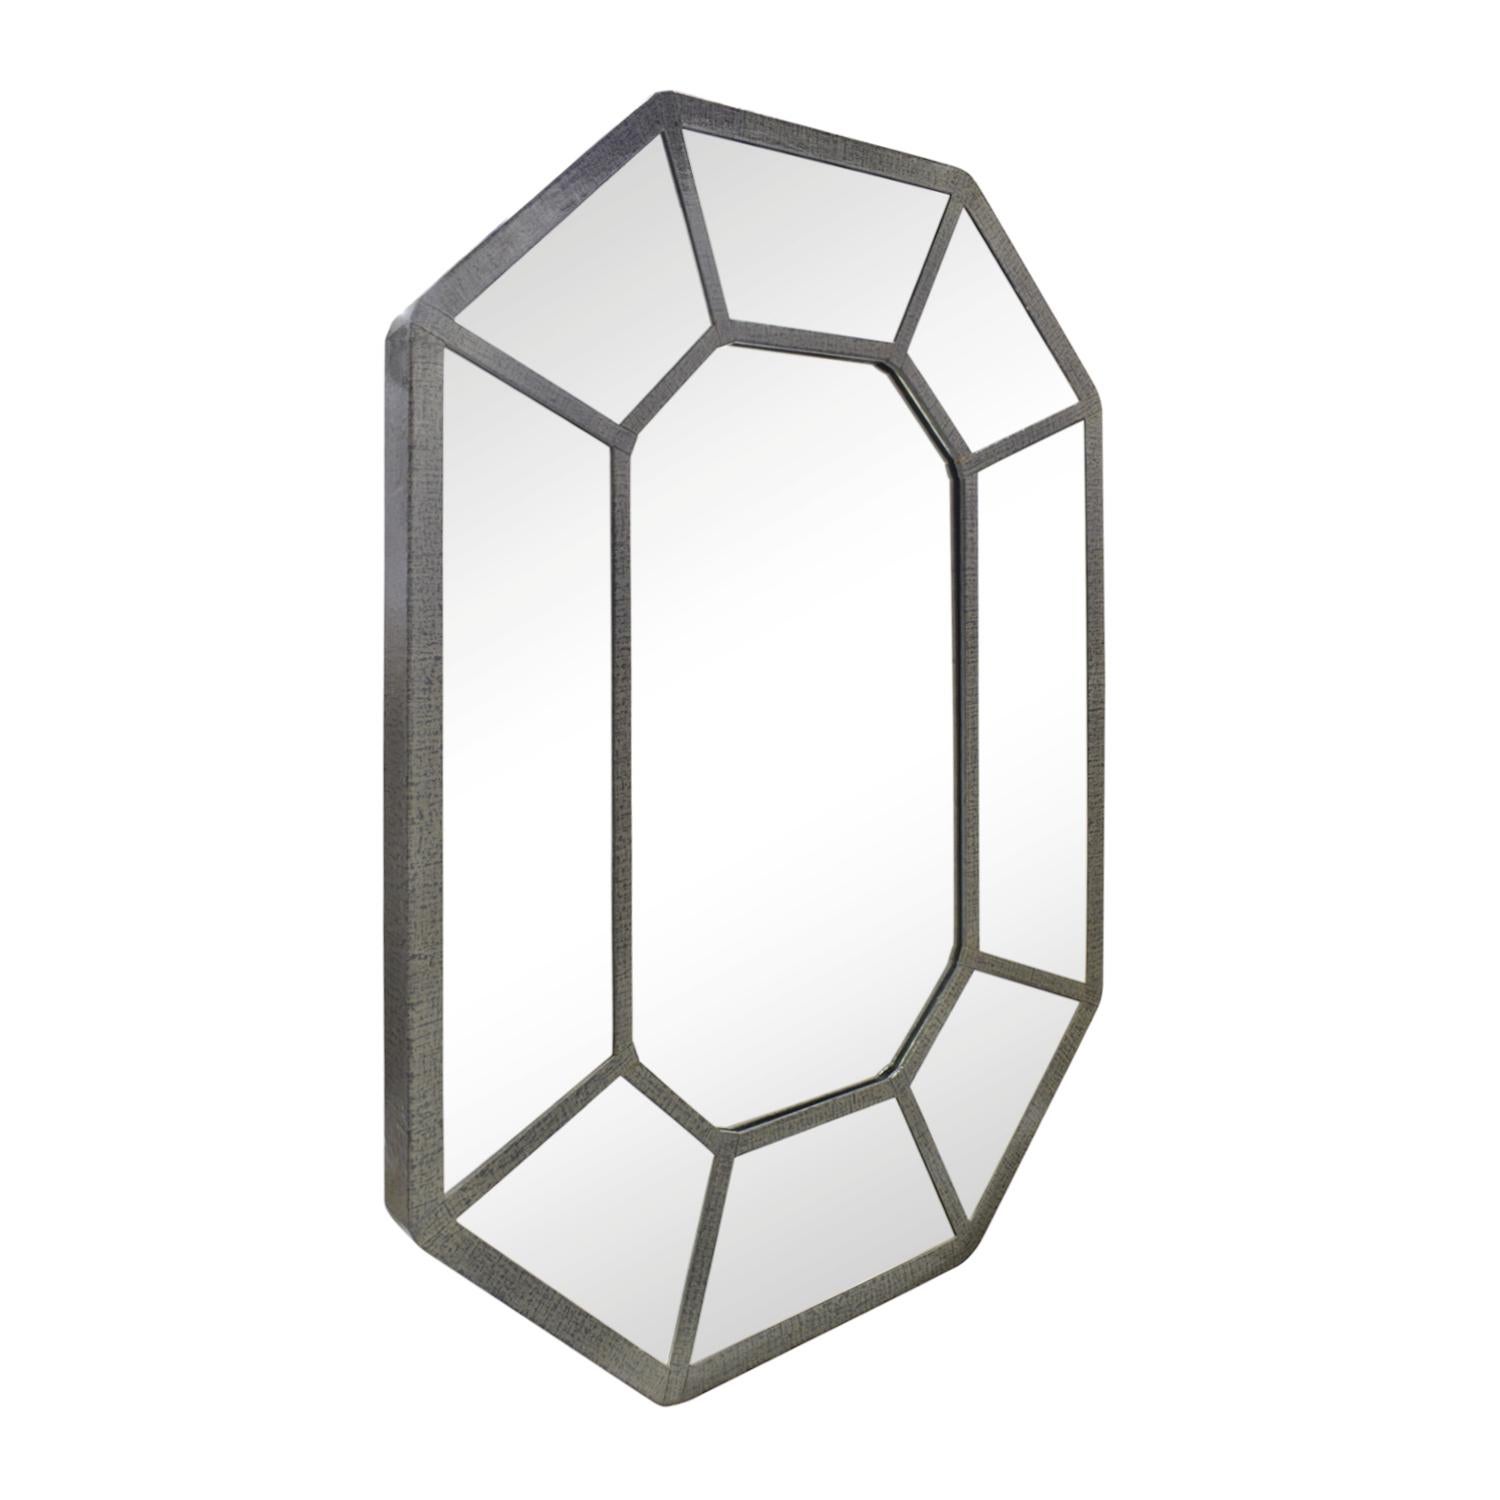 Large handcrafted octagonal wall hanging mirror in 2-tone lacquered linen by Karl Springer, American, 1970s. The two-tone lacquered linen is gray and blue. A beautiful design.